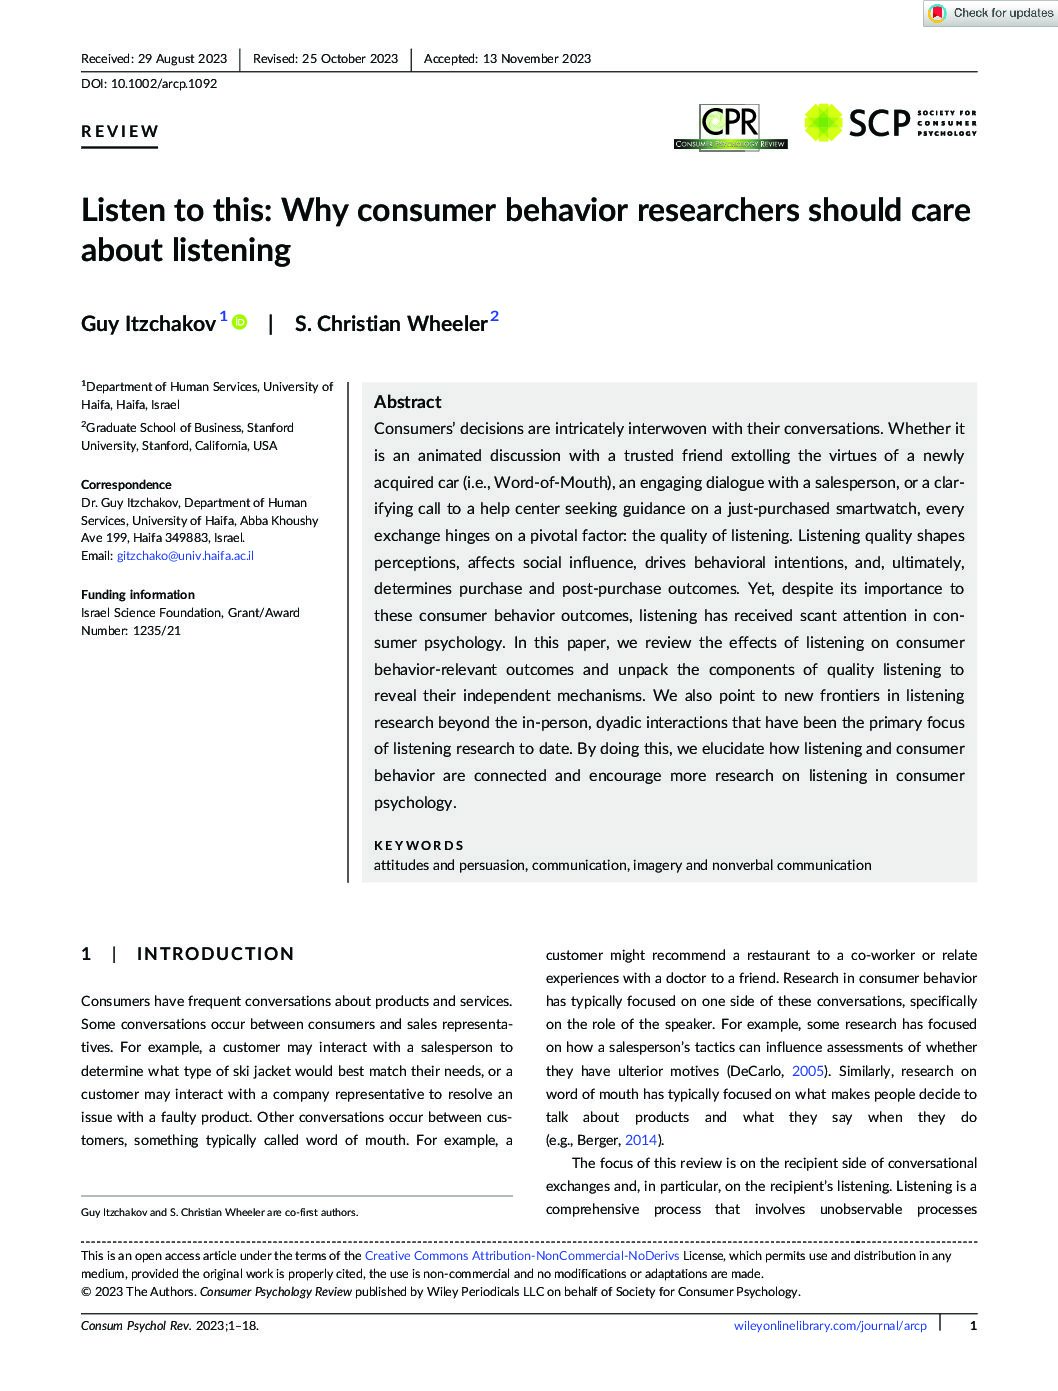 Listen to this Why consumer behavior researchers should care about